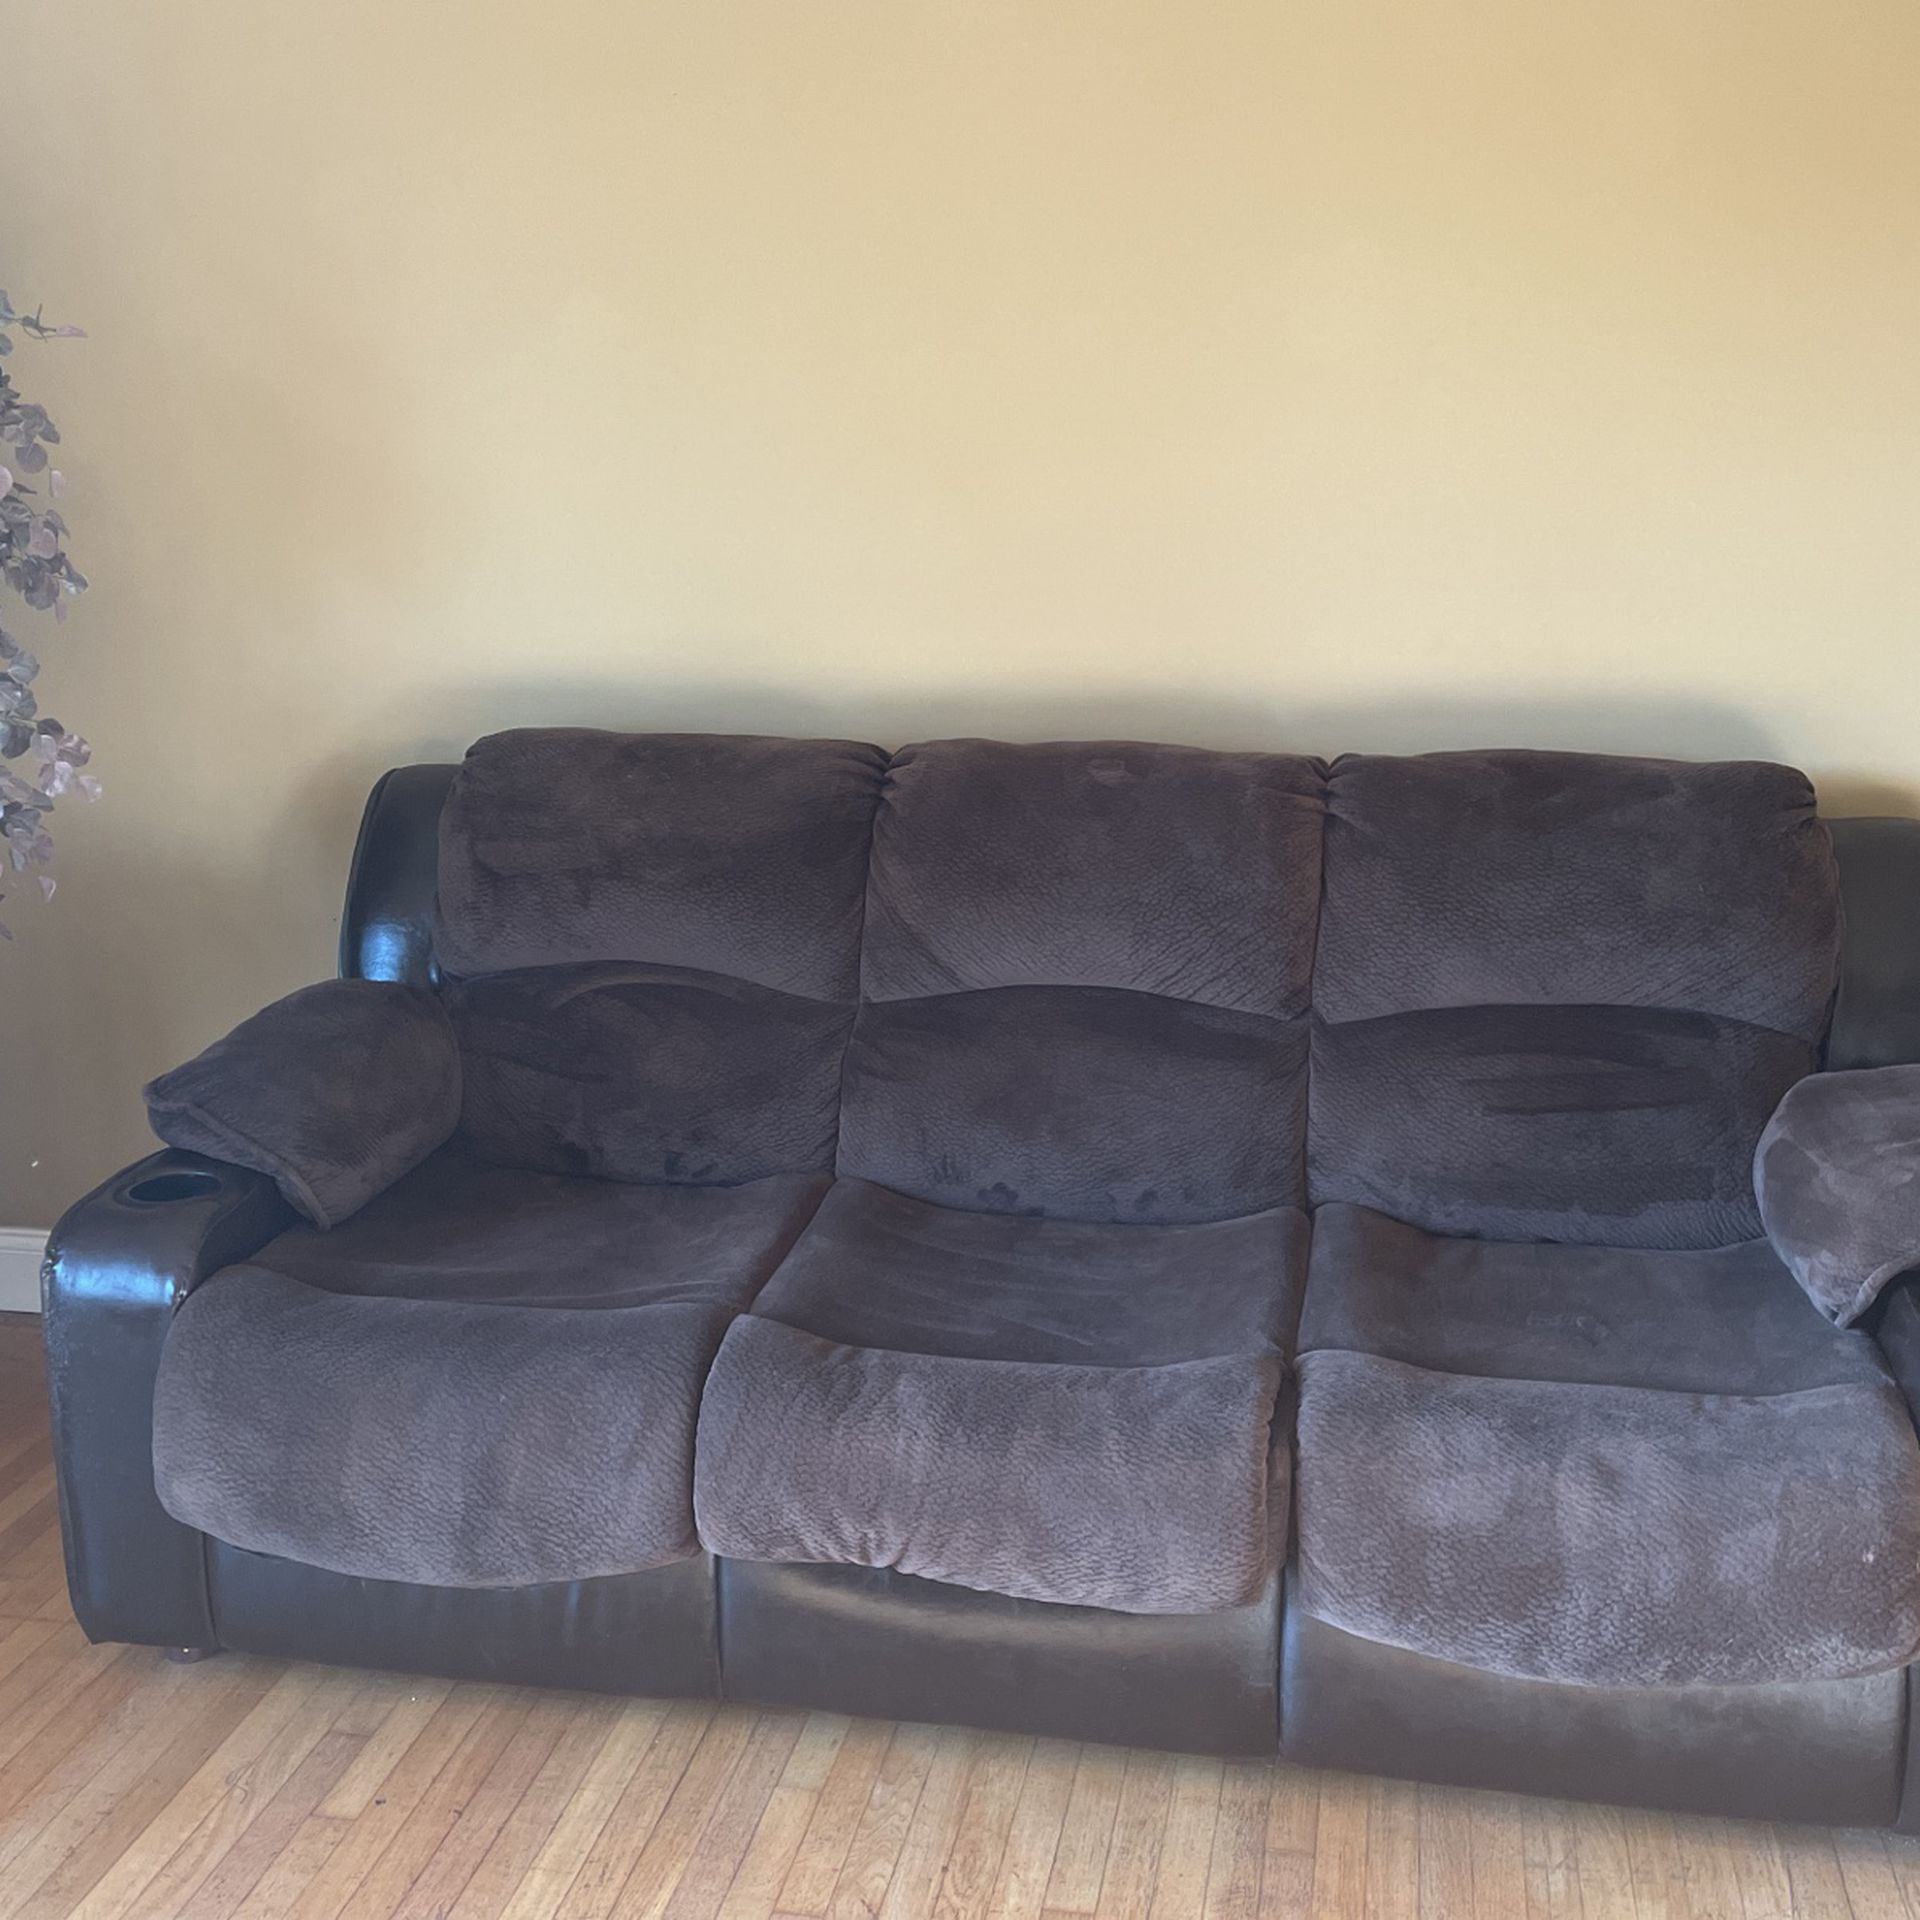 MOVING  MUST SELL ! Brown Sofa Bed Couch And Matching Recliner